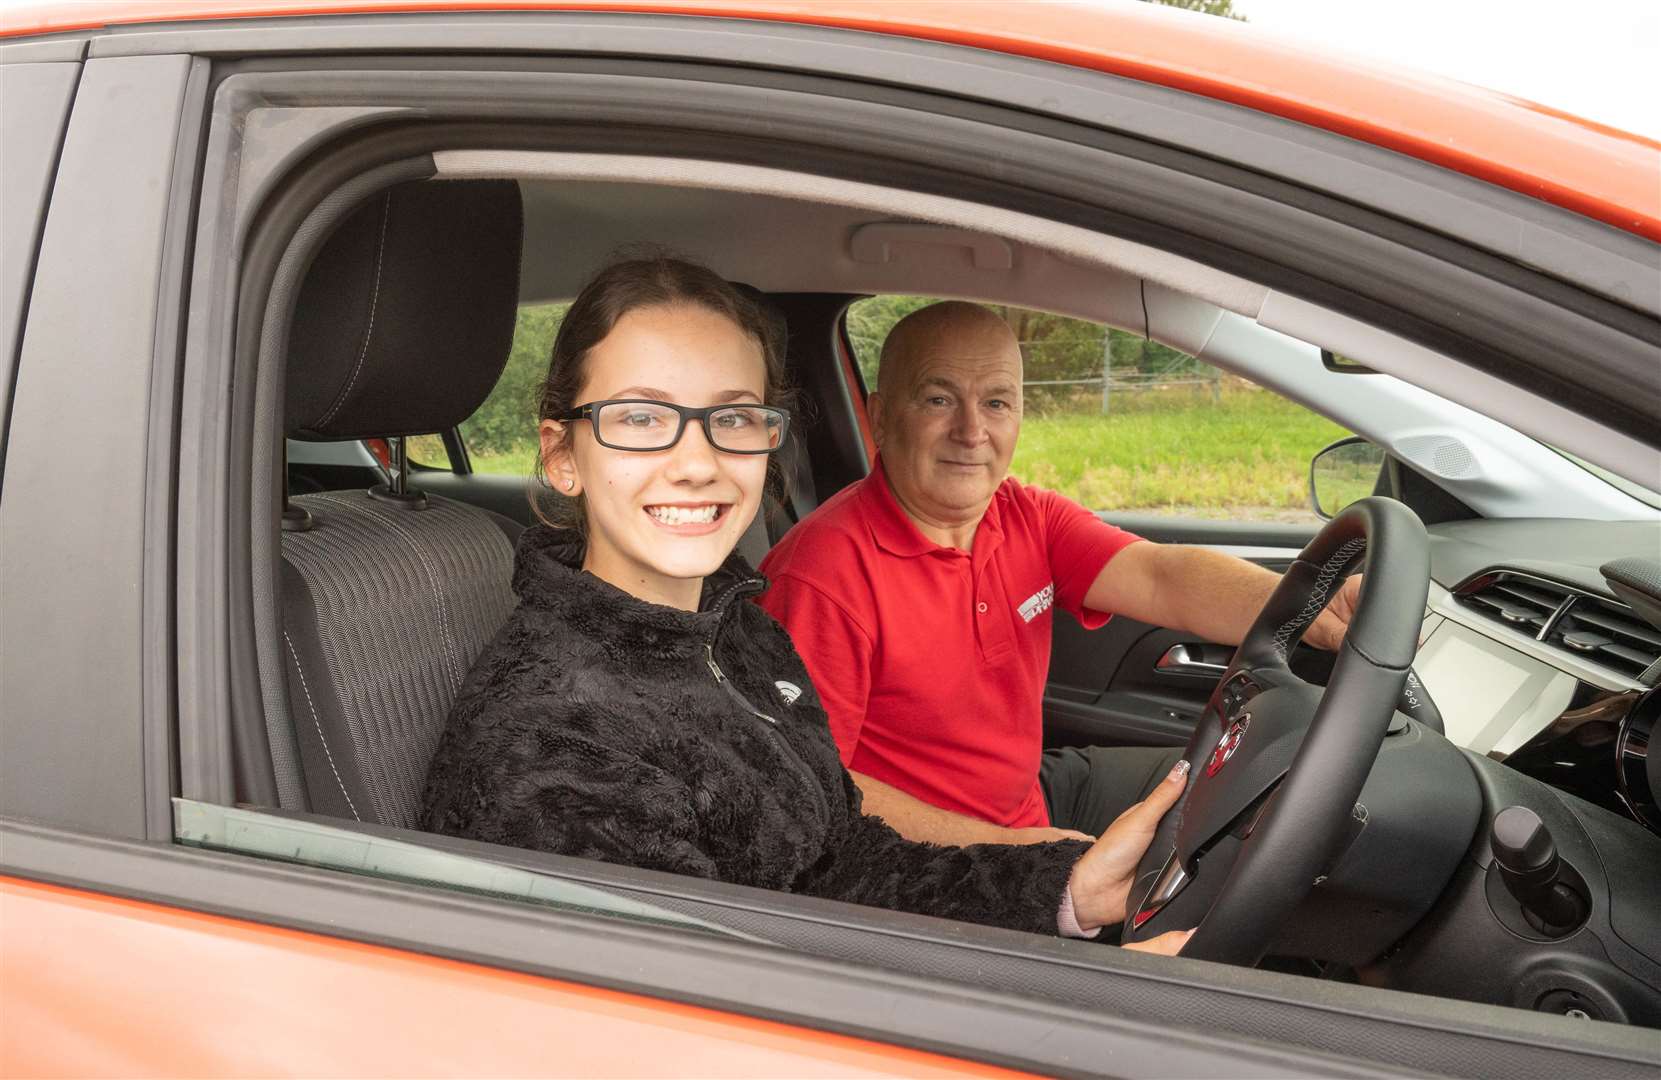 Motorists as young as ten will be able to experience life behind the wheel at an event held at Bluewater for October half term. Photo: Young Driver